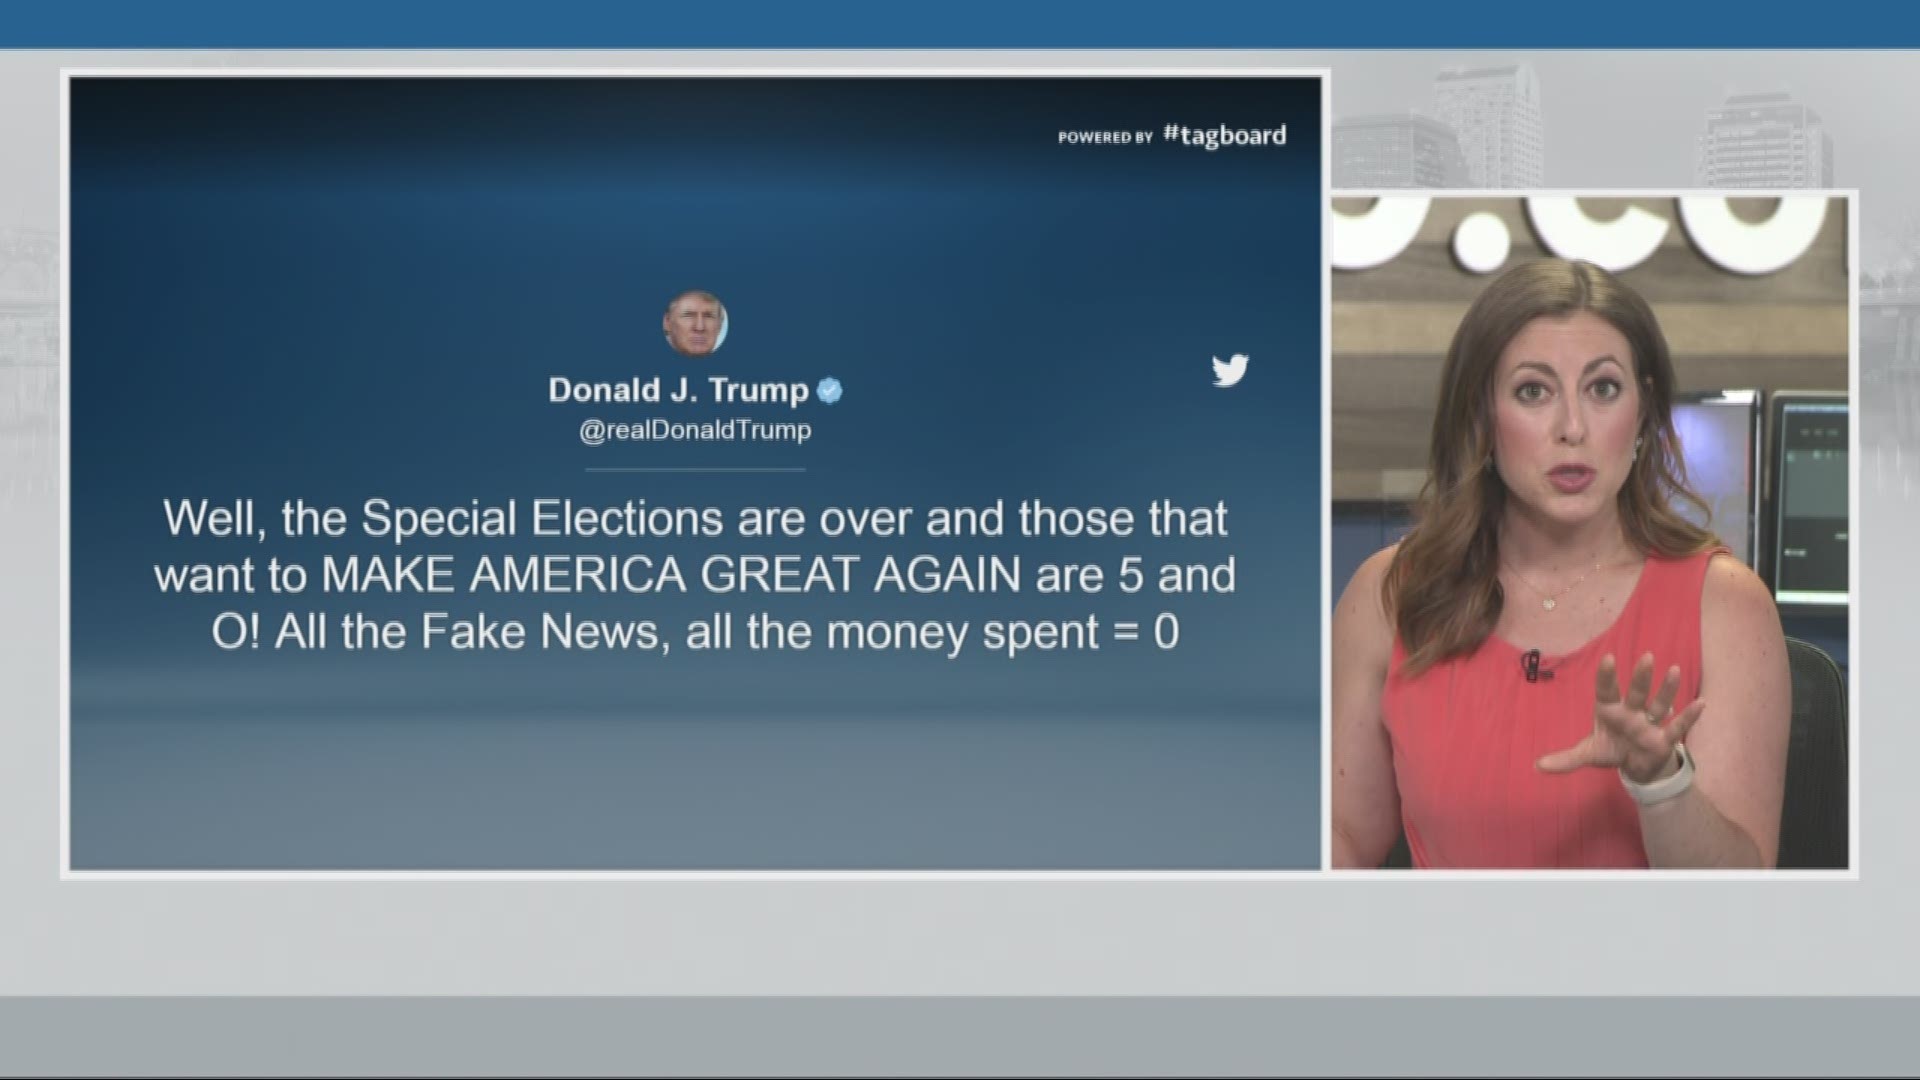 President Trump gets fact-checked on special elections tweet (June 21, 2017)